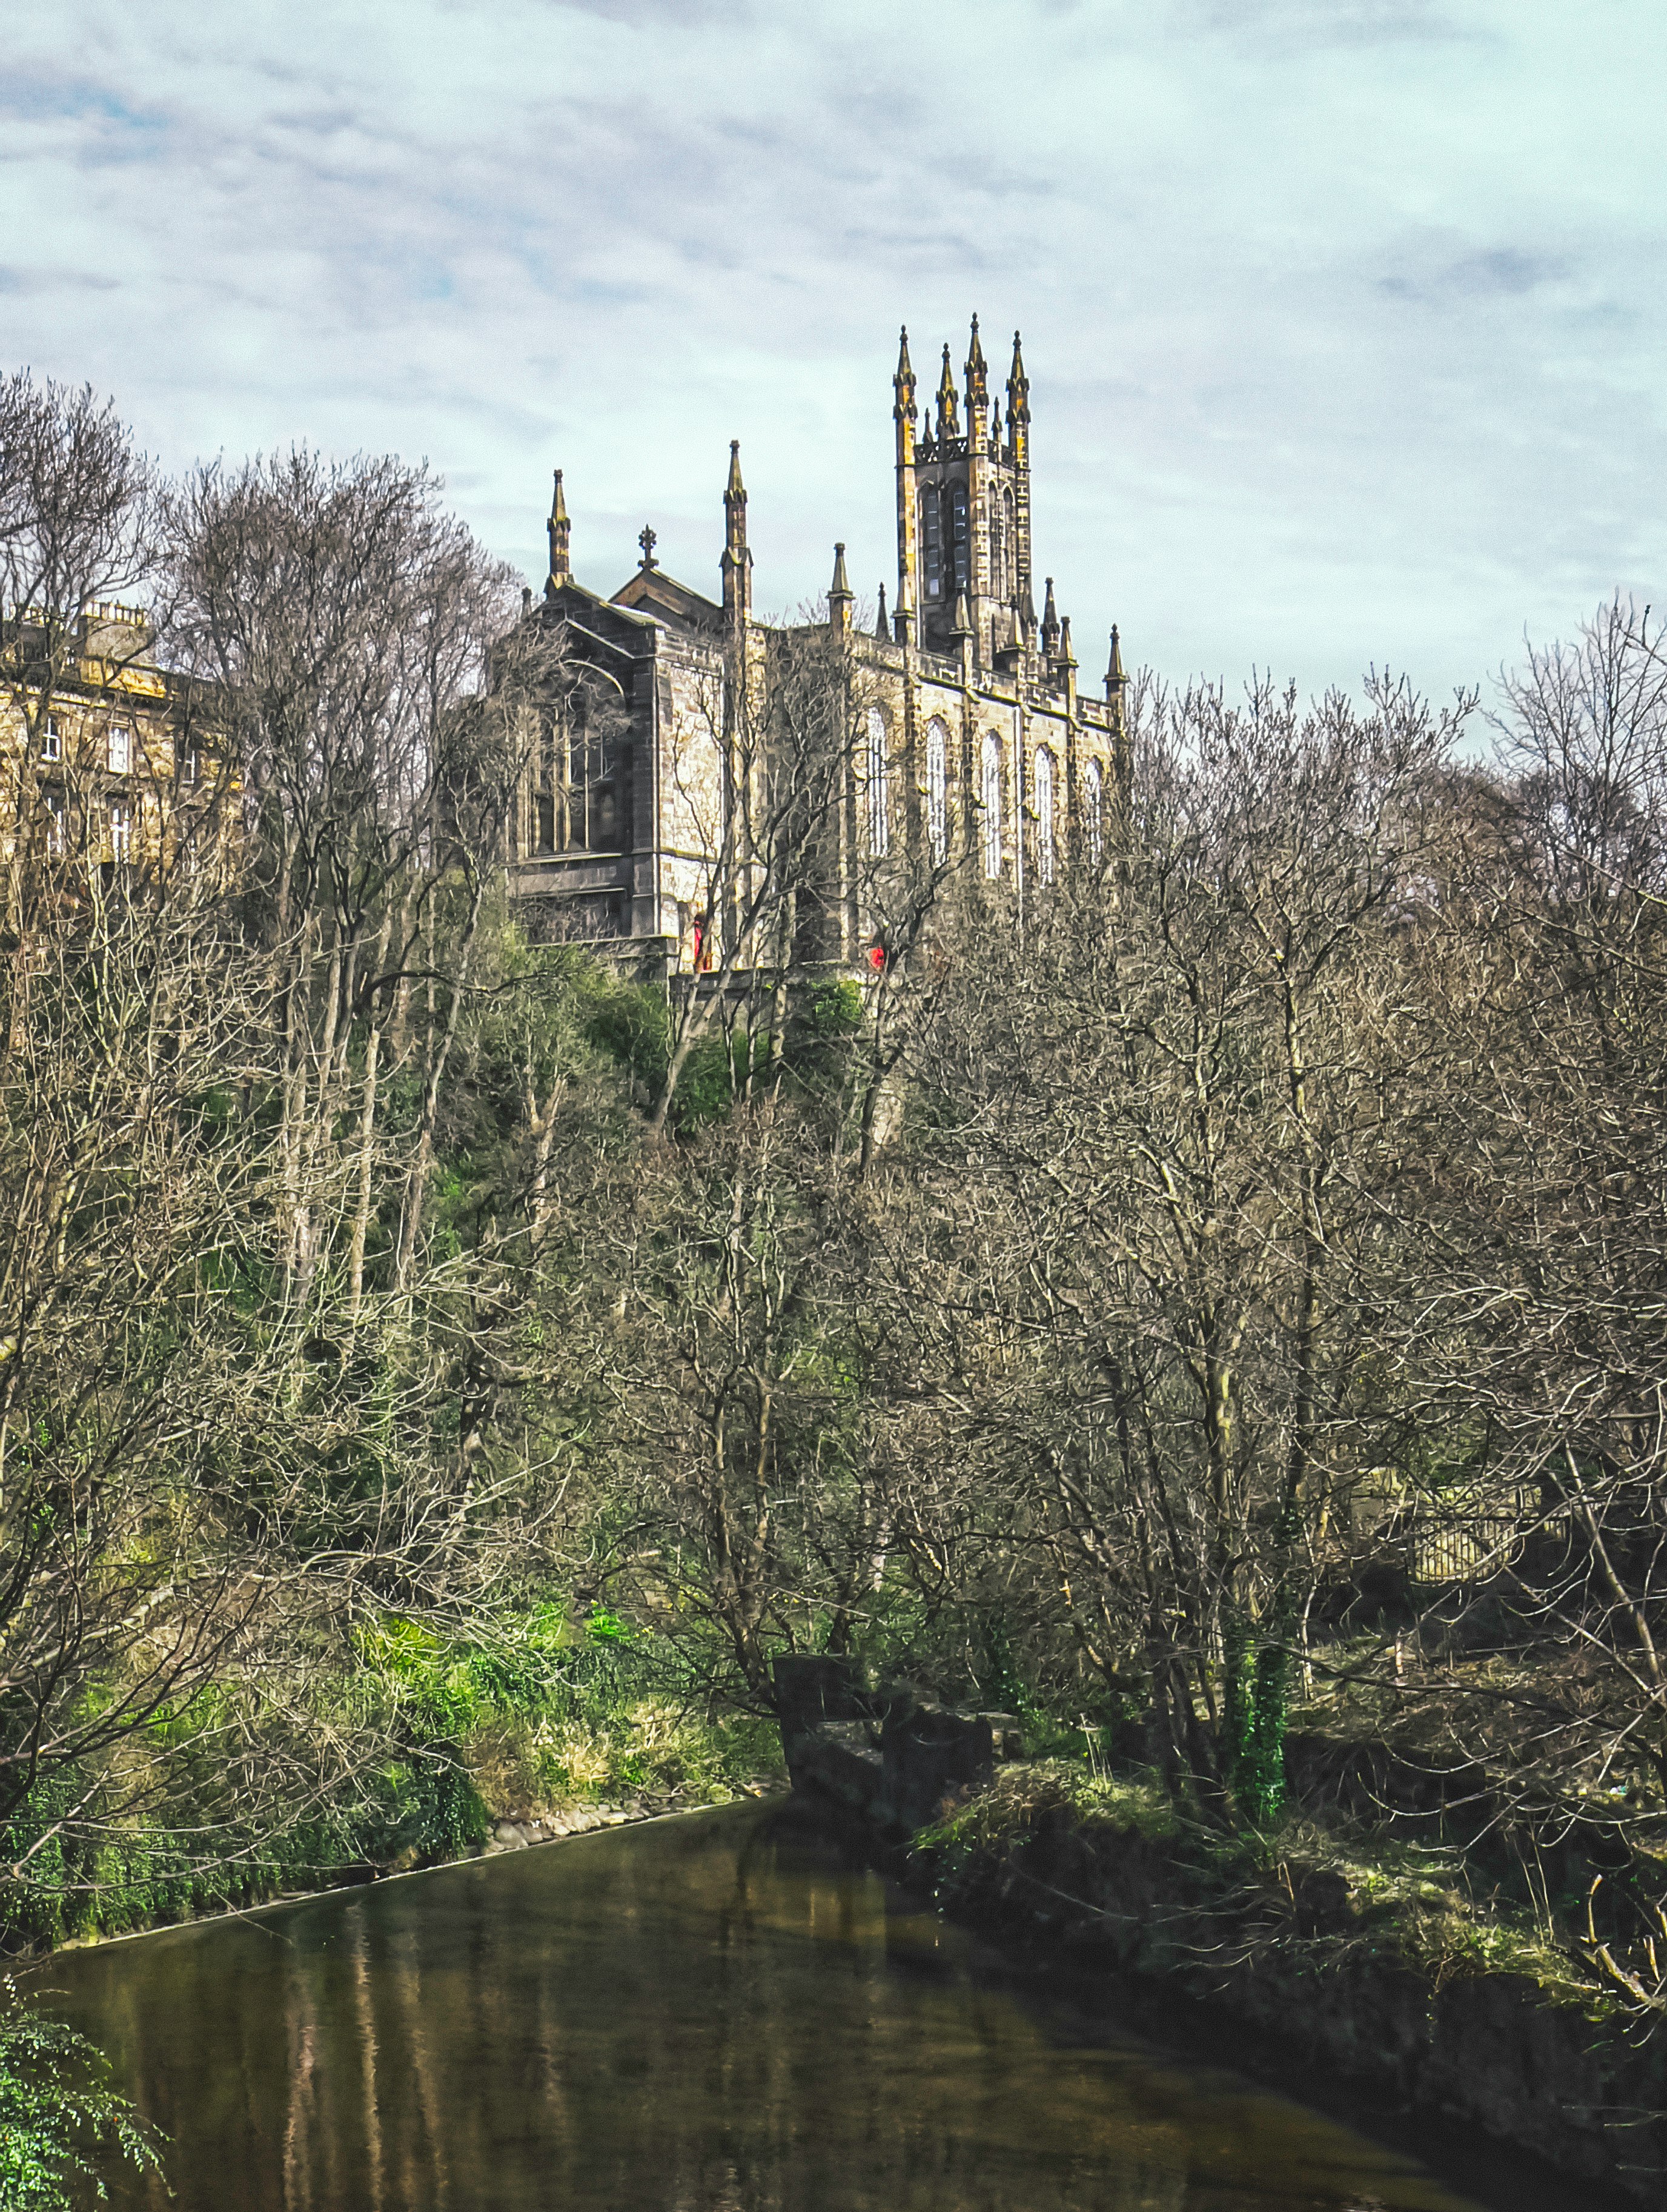 The Rhema Church sits on a hill above the Water of Leith in Edinburgh (Apr., 2010).